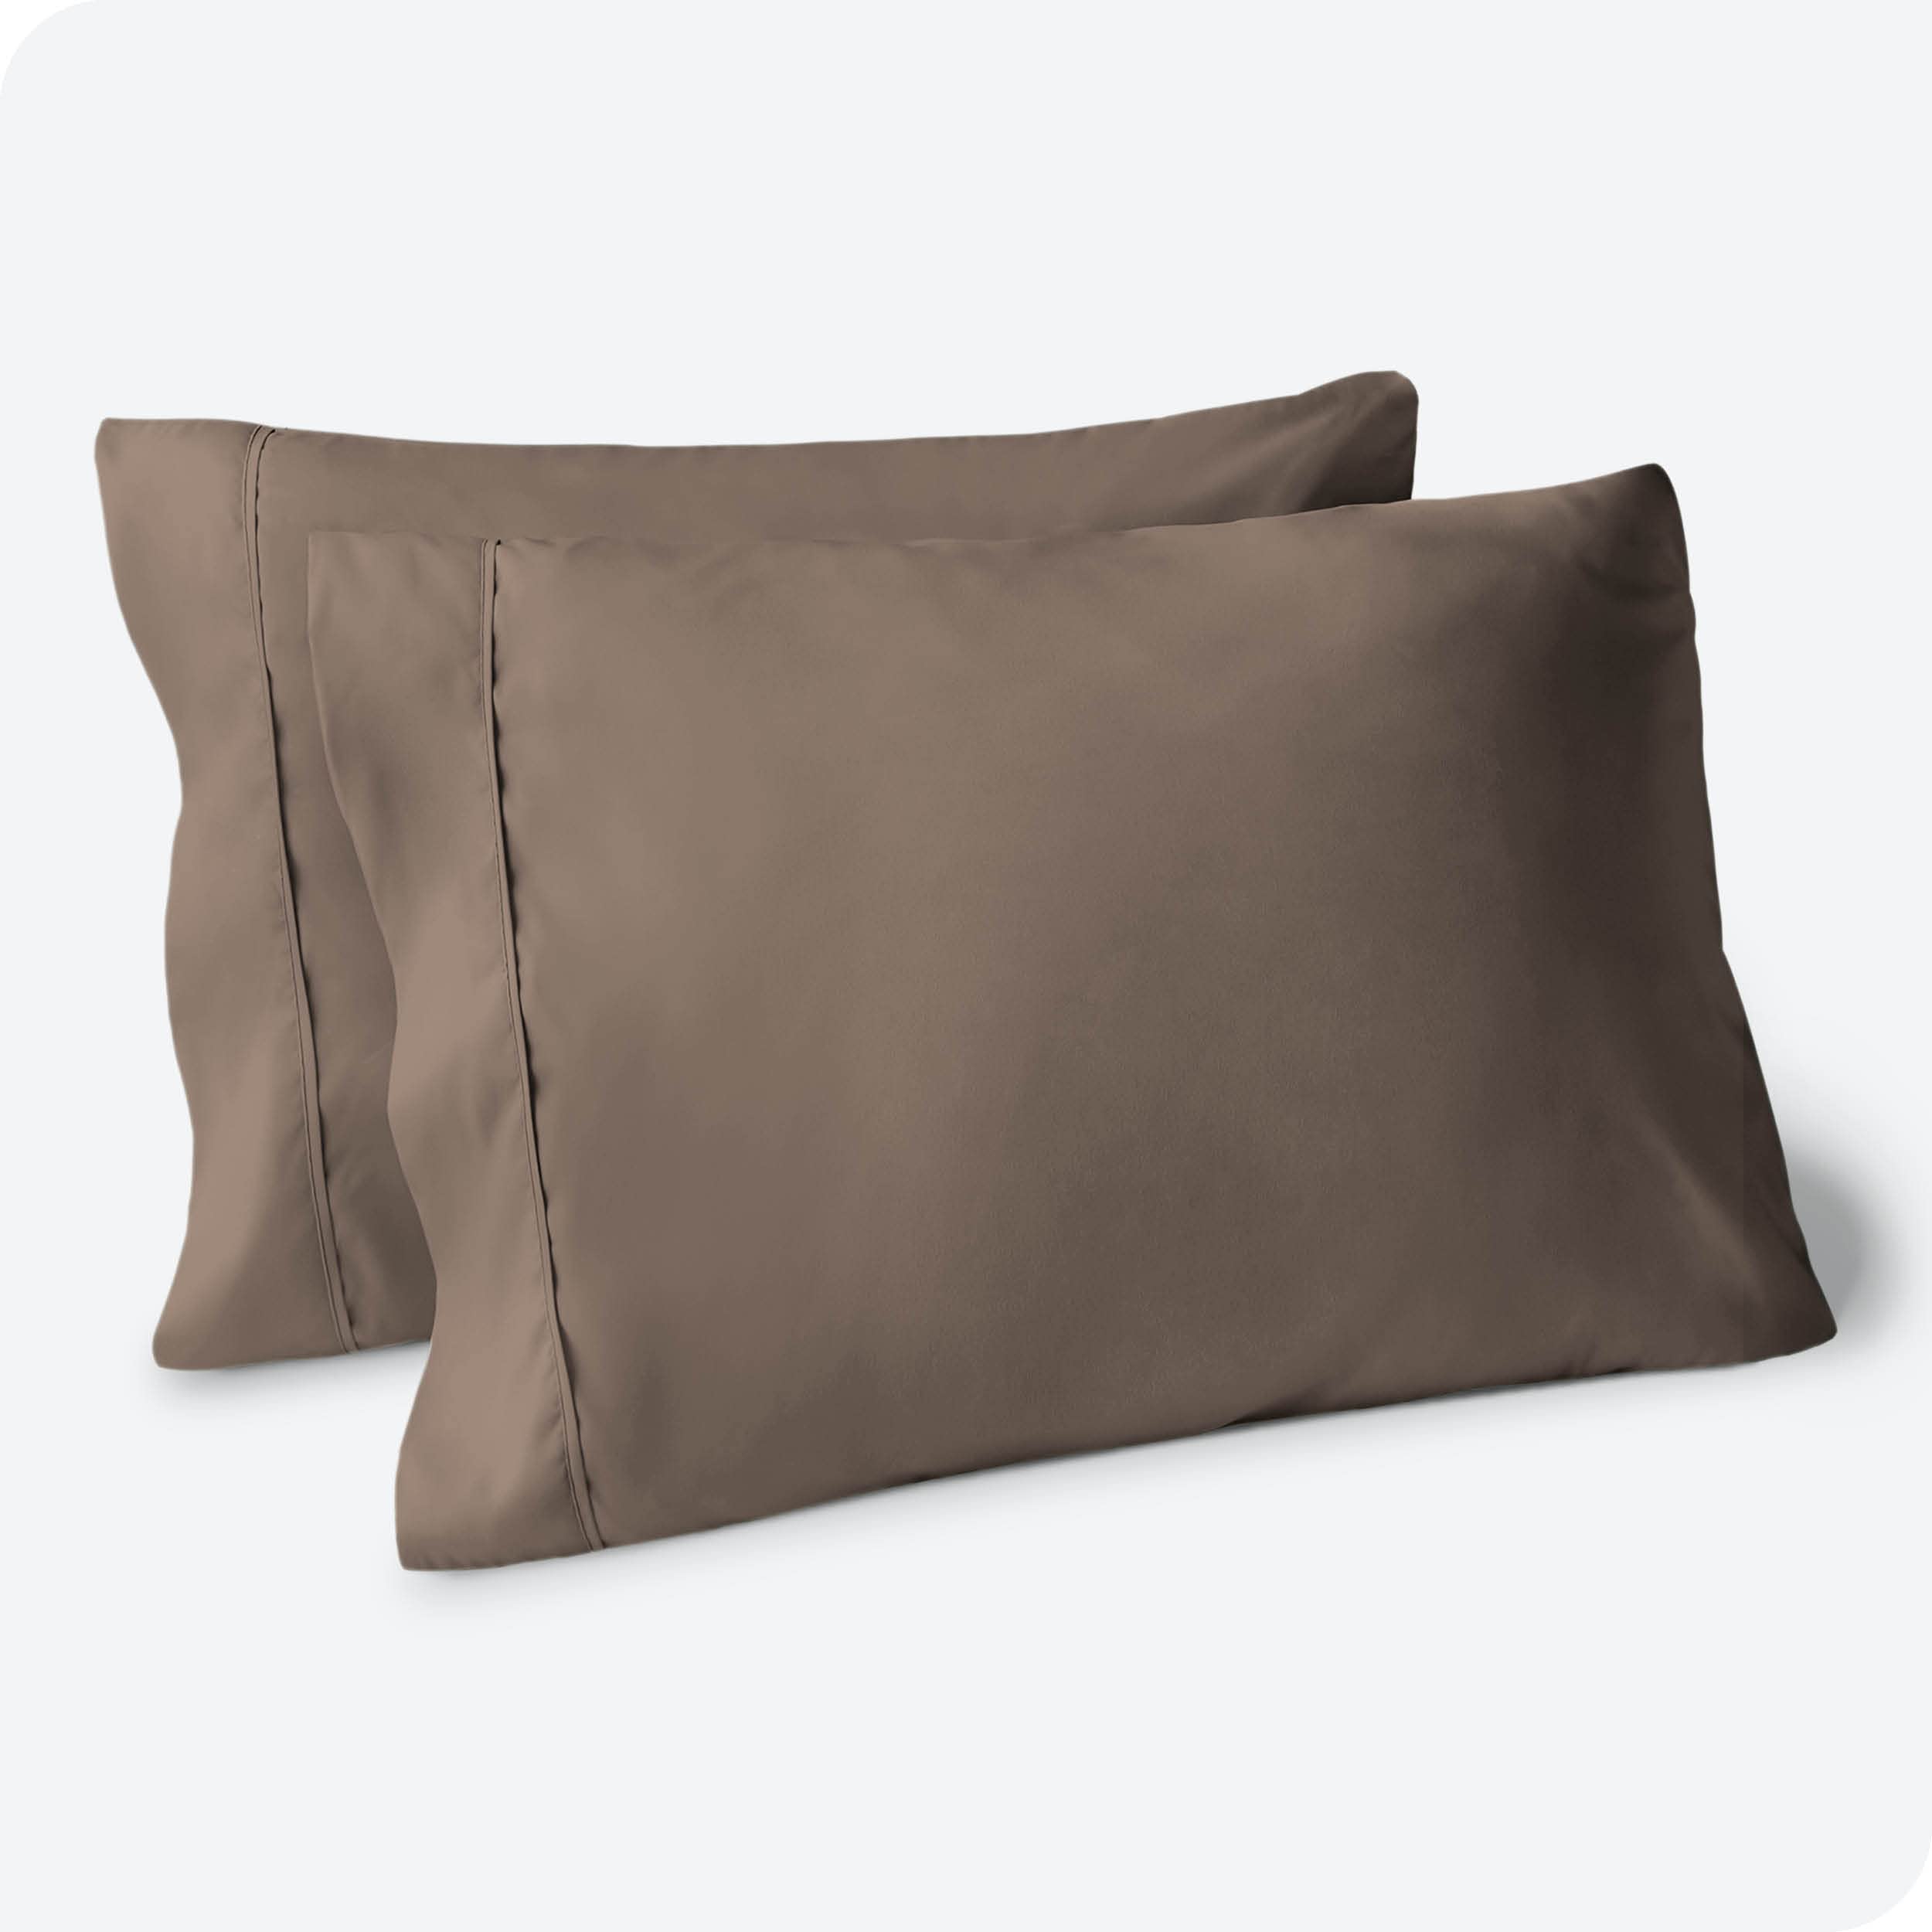 Book Cover Bare Home Microfiber Pillow Cases - King Size Set of 2 - Cooling Pillowcases - Double Brushed - Taupe Pillowcases 2 Pack - Easy Care (King Pillowcase Set of 2, Taupe) 20x40 King (2 Pack) 08 - Taupe